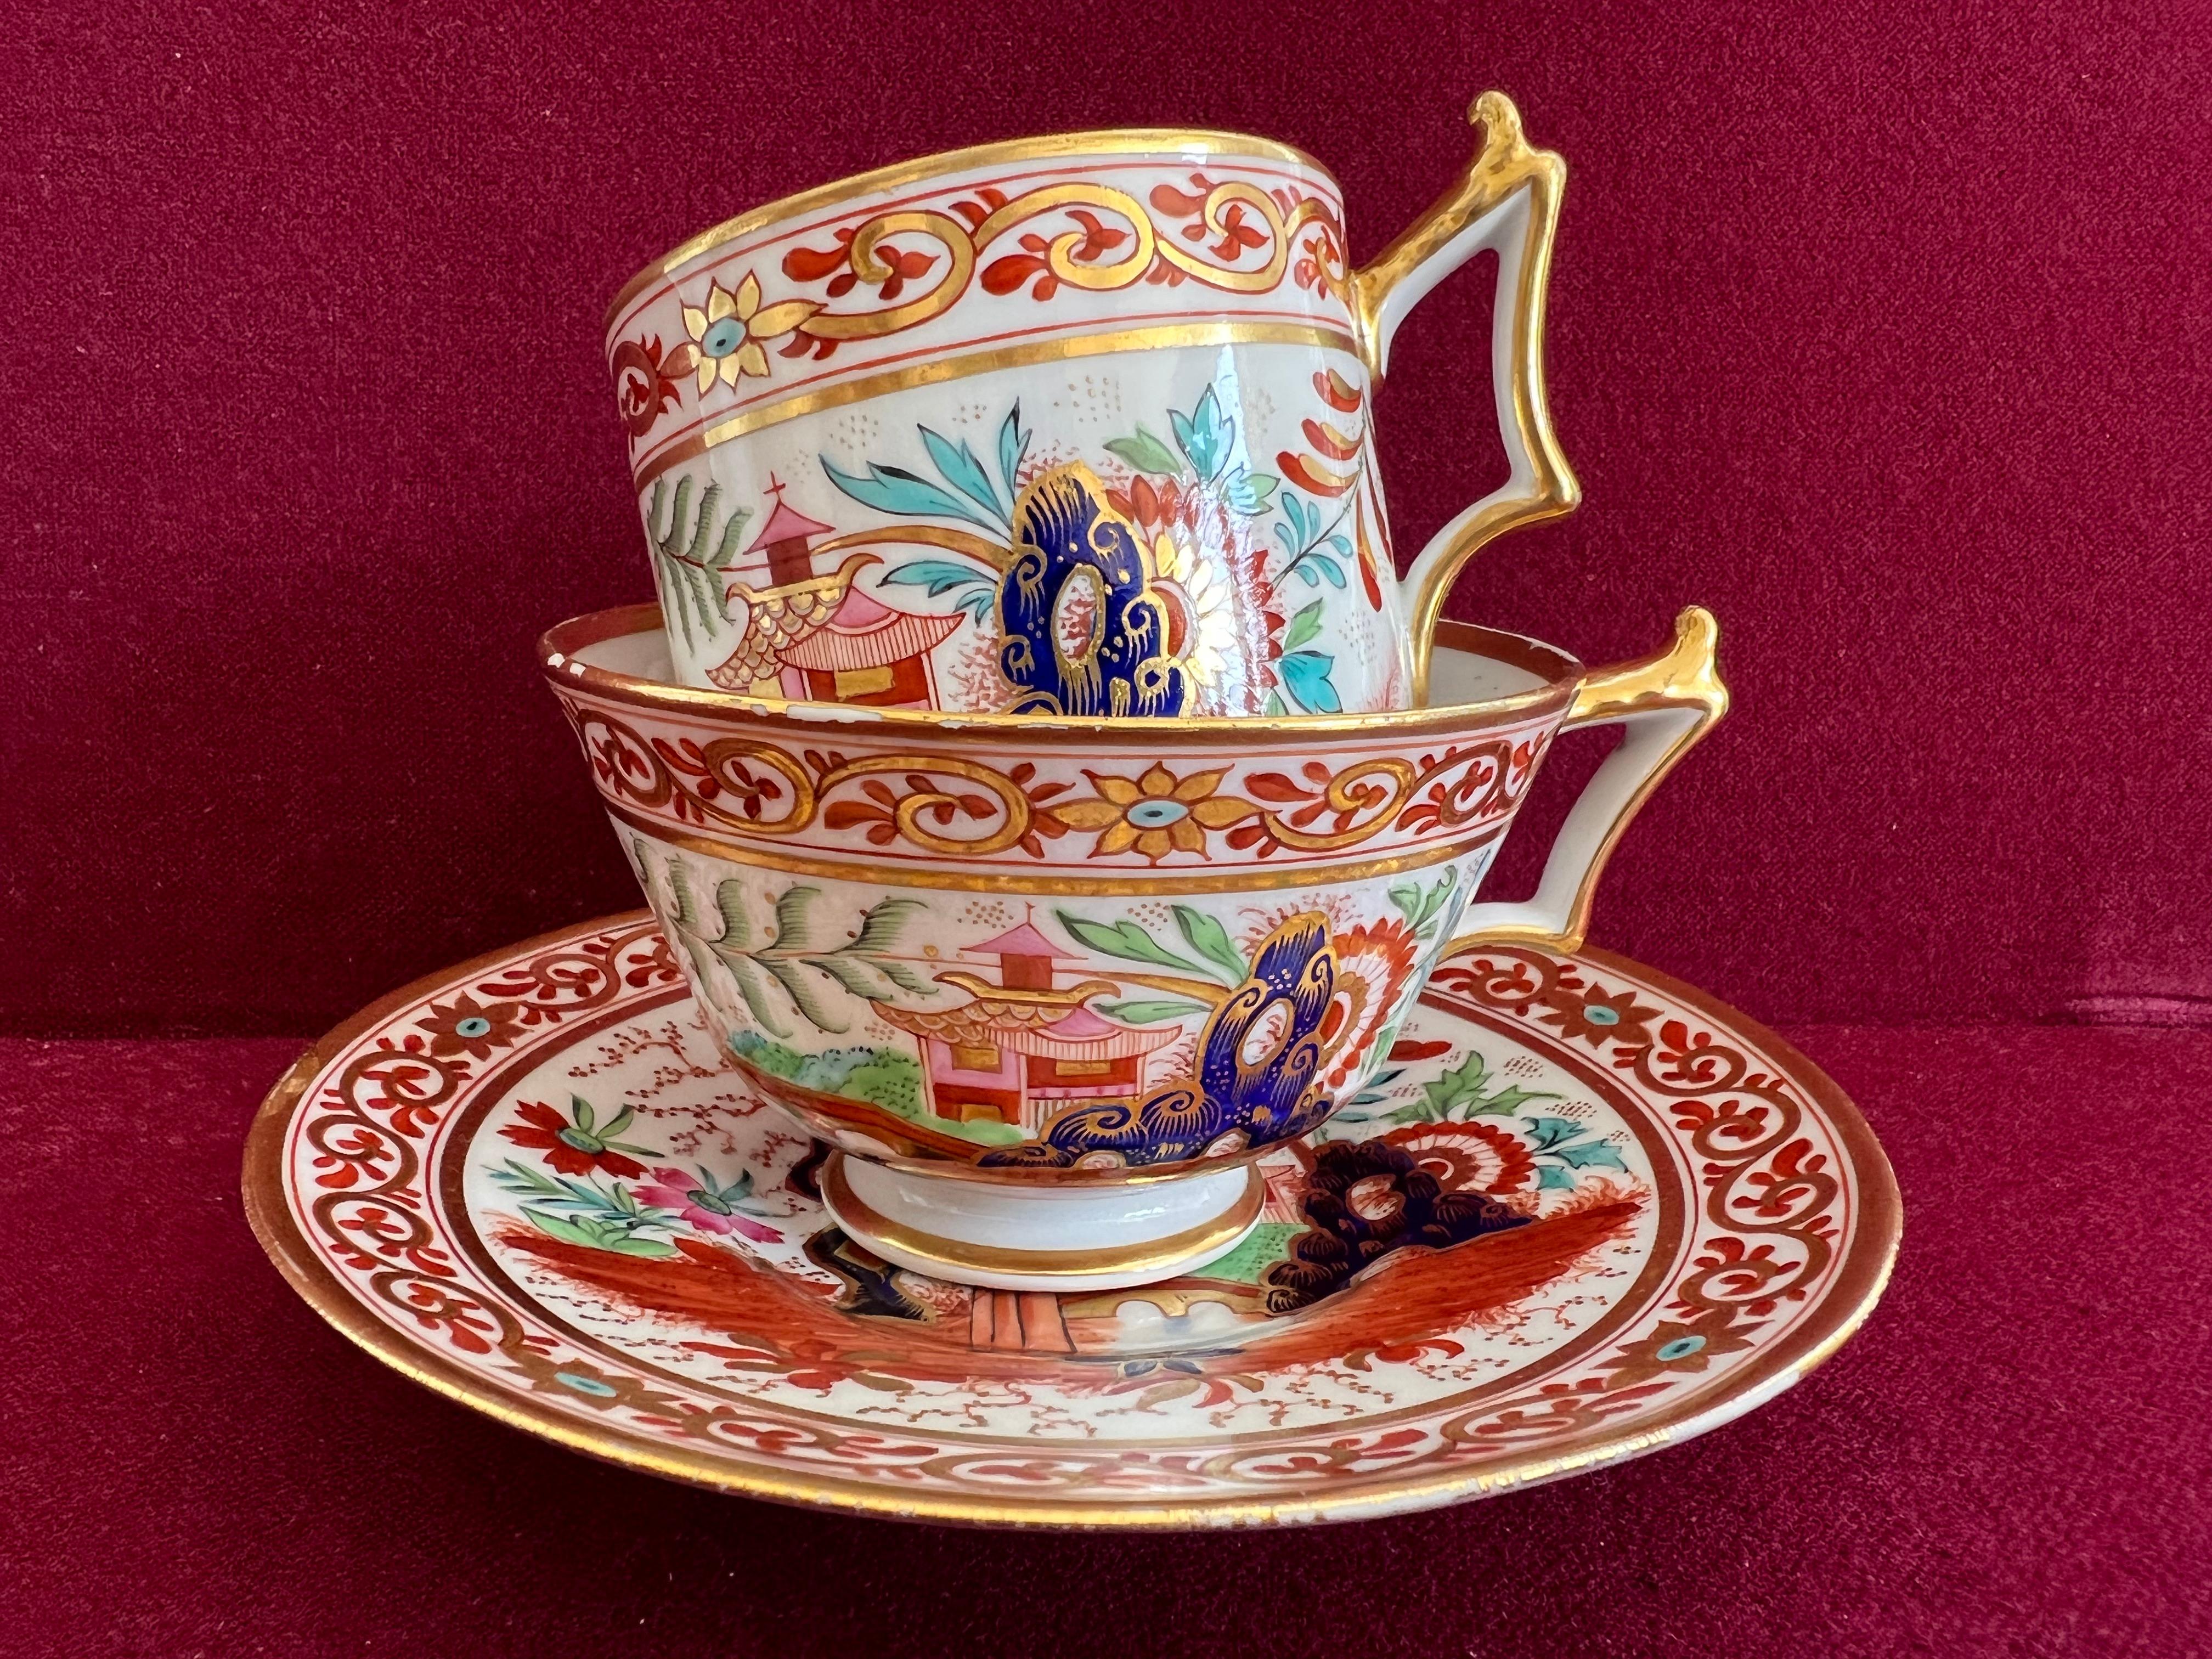 A Flight Barr and Barr Worcester Porcelain Japan pattern trio c.1815-1820.

Condition: A small amount of wear to the gilding in places.